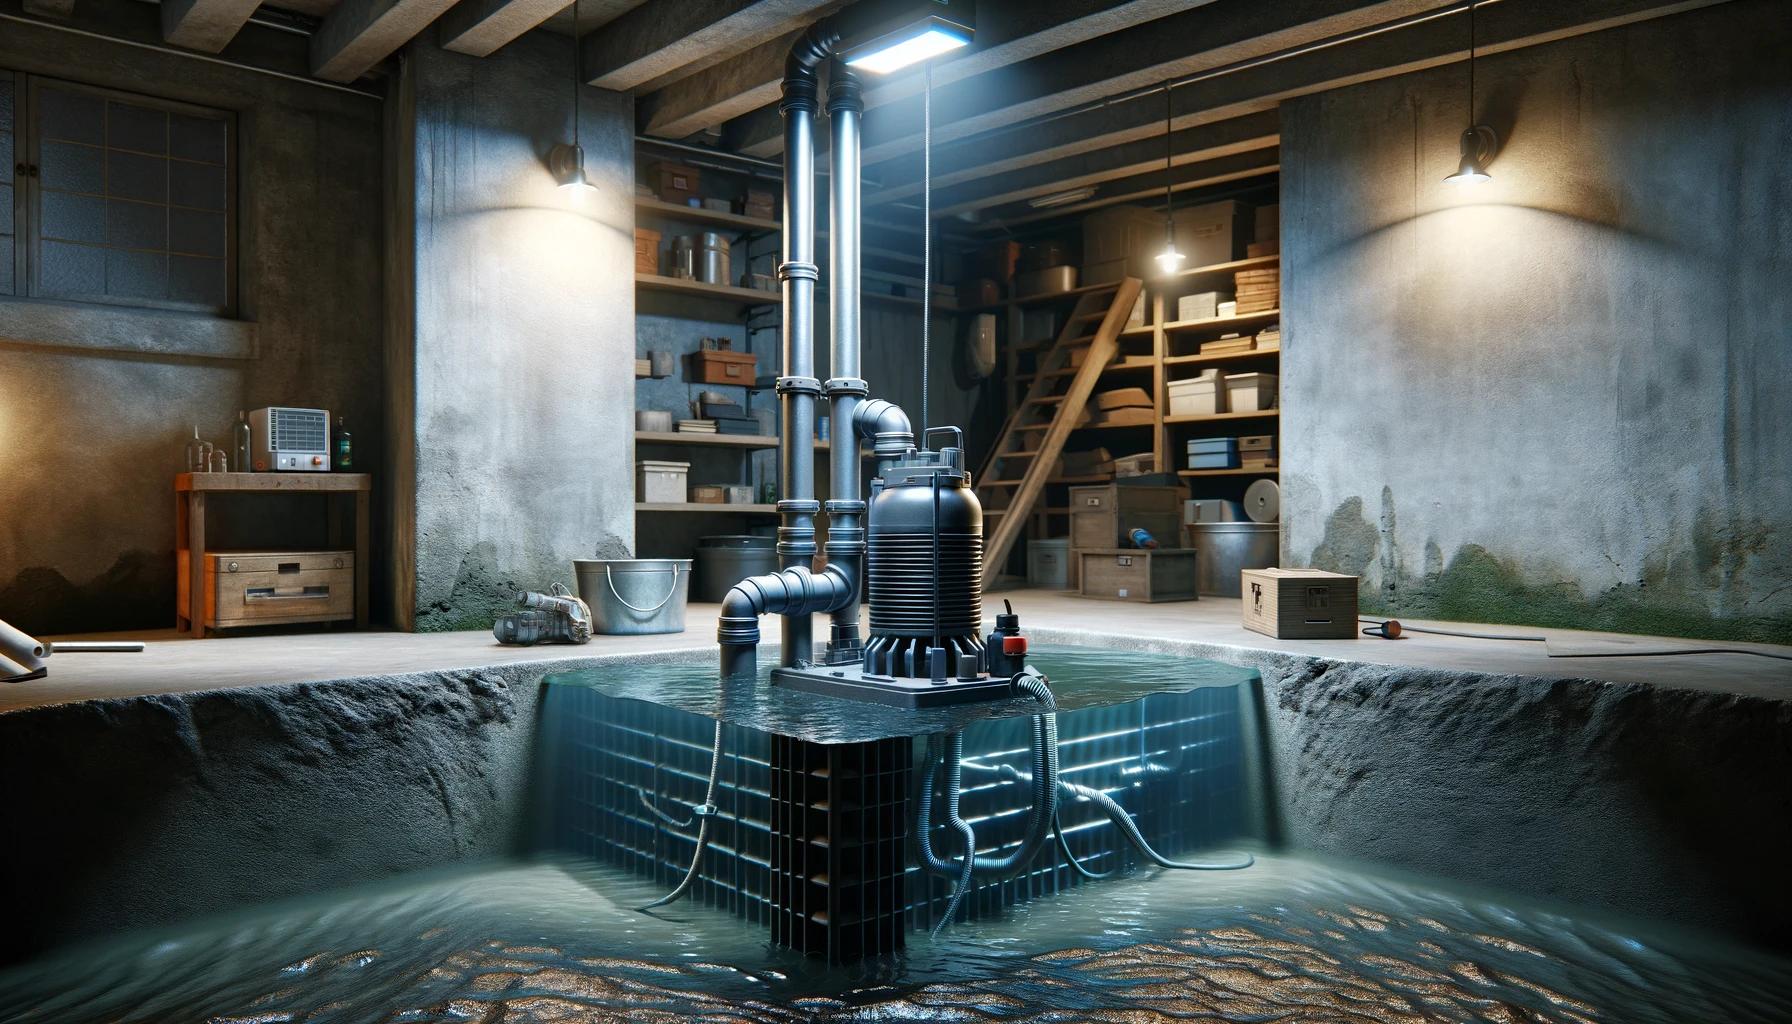 A cut away Illustration of a working sump pump in a home basement designed to be futuristic